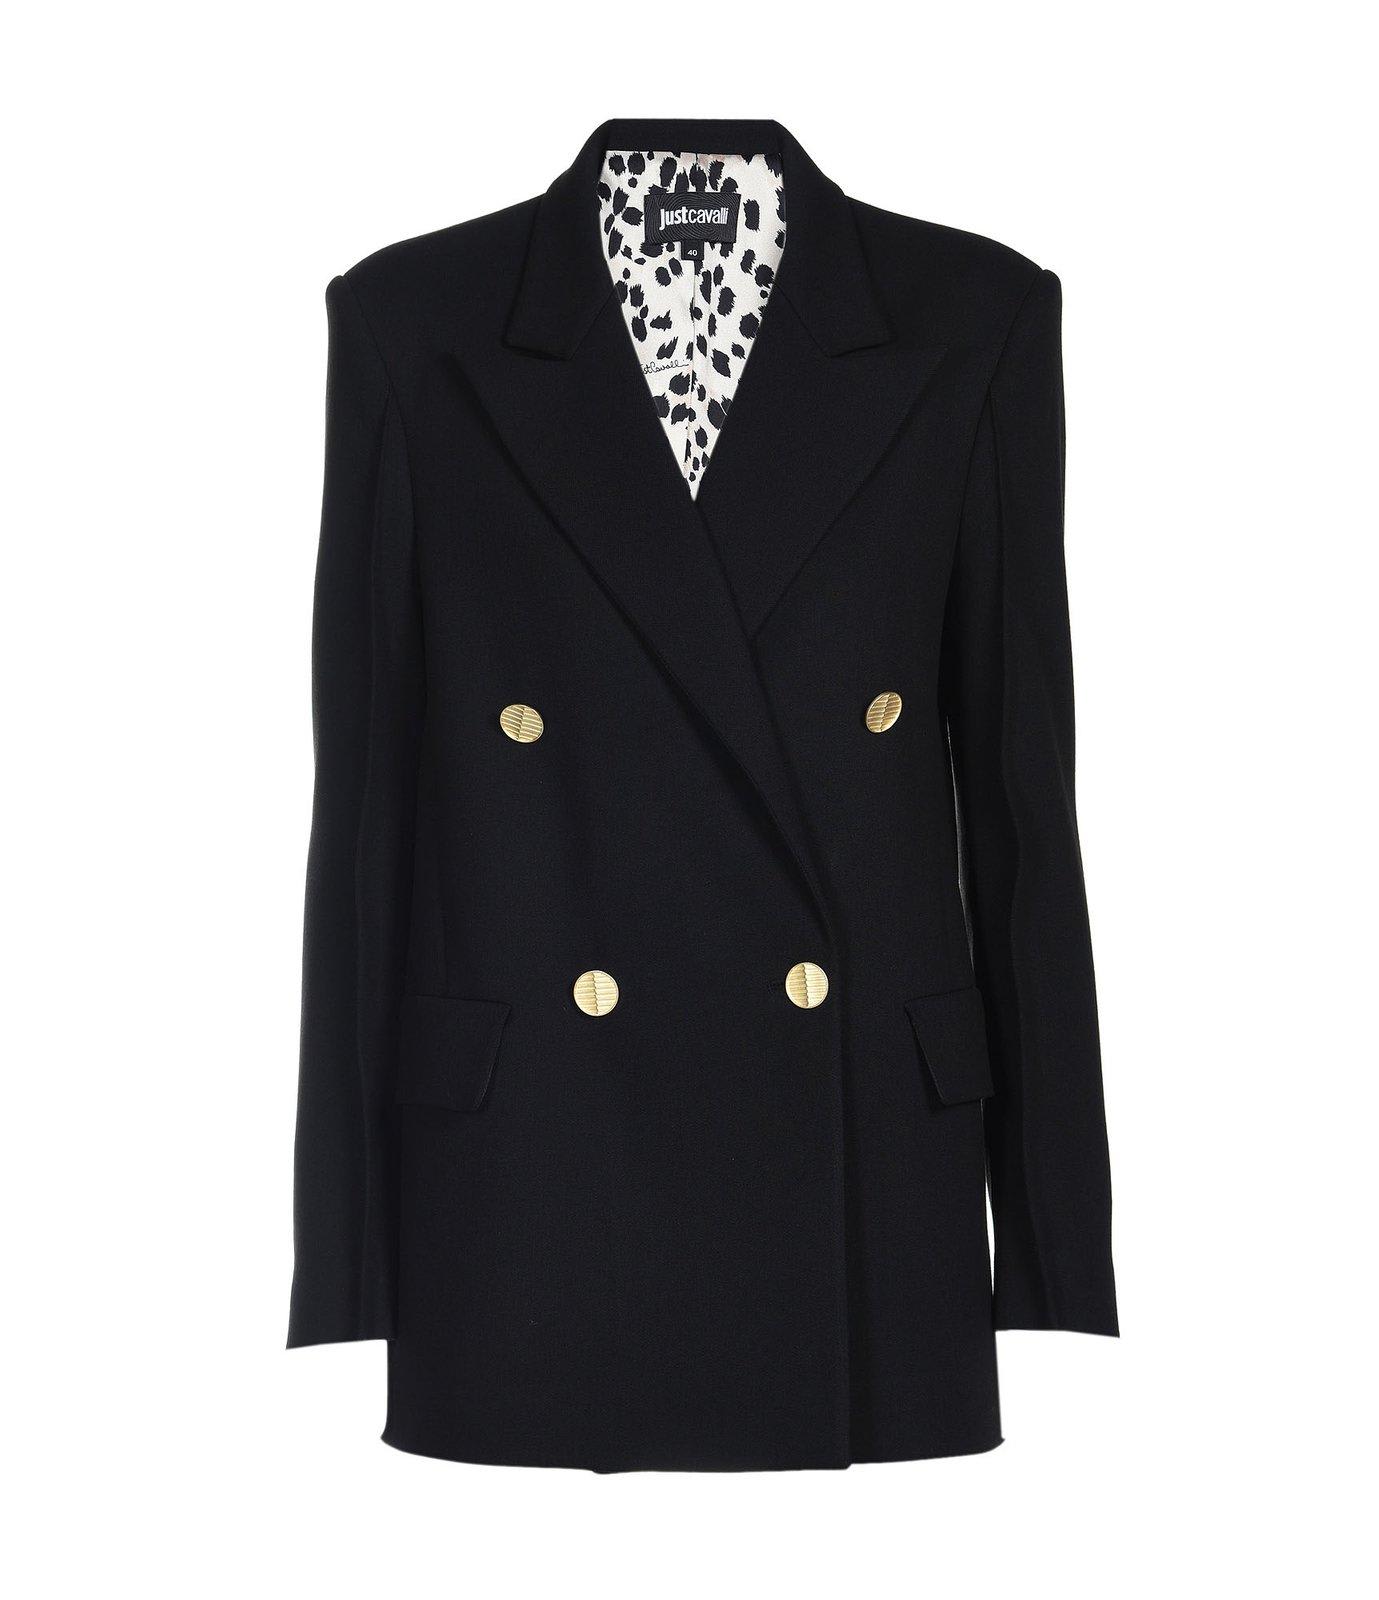 Just Cavalli Double-breasted Long-sleeved Blazer